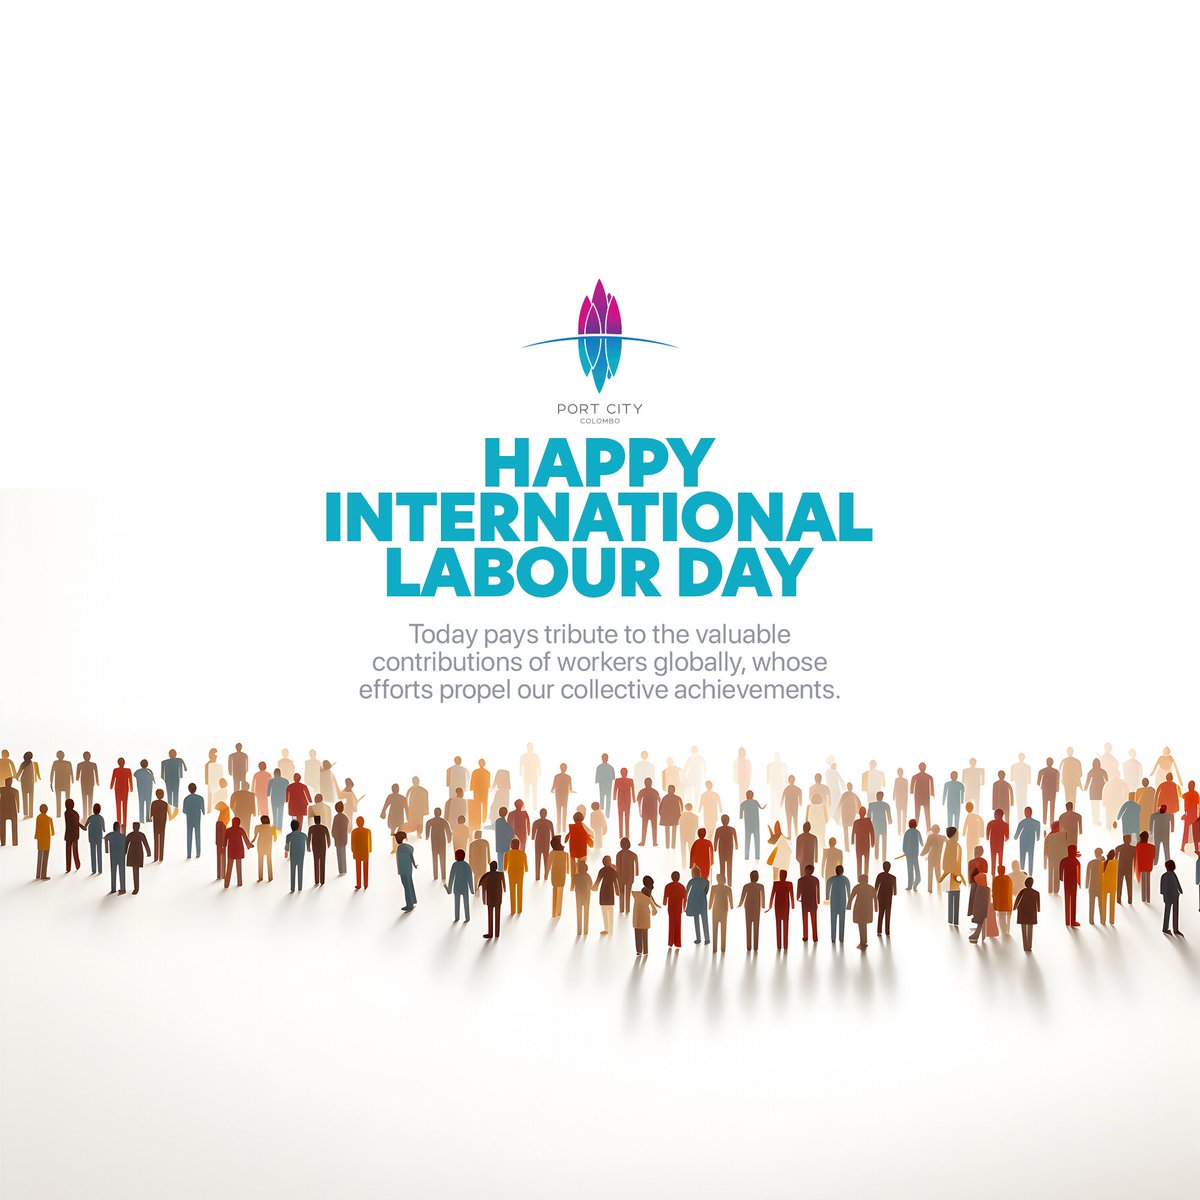 On International Labour Day, we honor the contributions of all workers whose dedication drives progress and innovation. We especially thank the hardworking team at Port City Colombo and beyond. Enjoy a well-deserved day of rest and recognition. #portcitycolombo